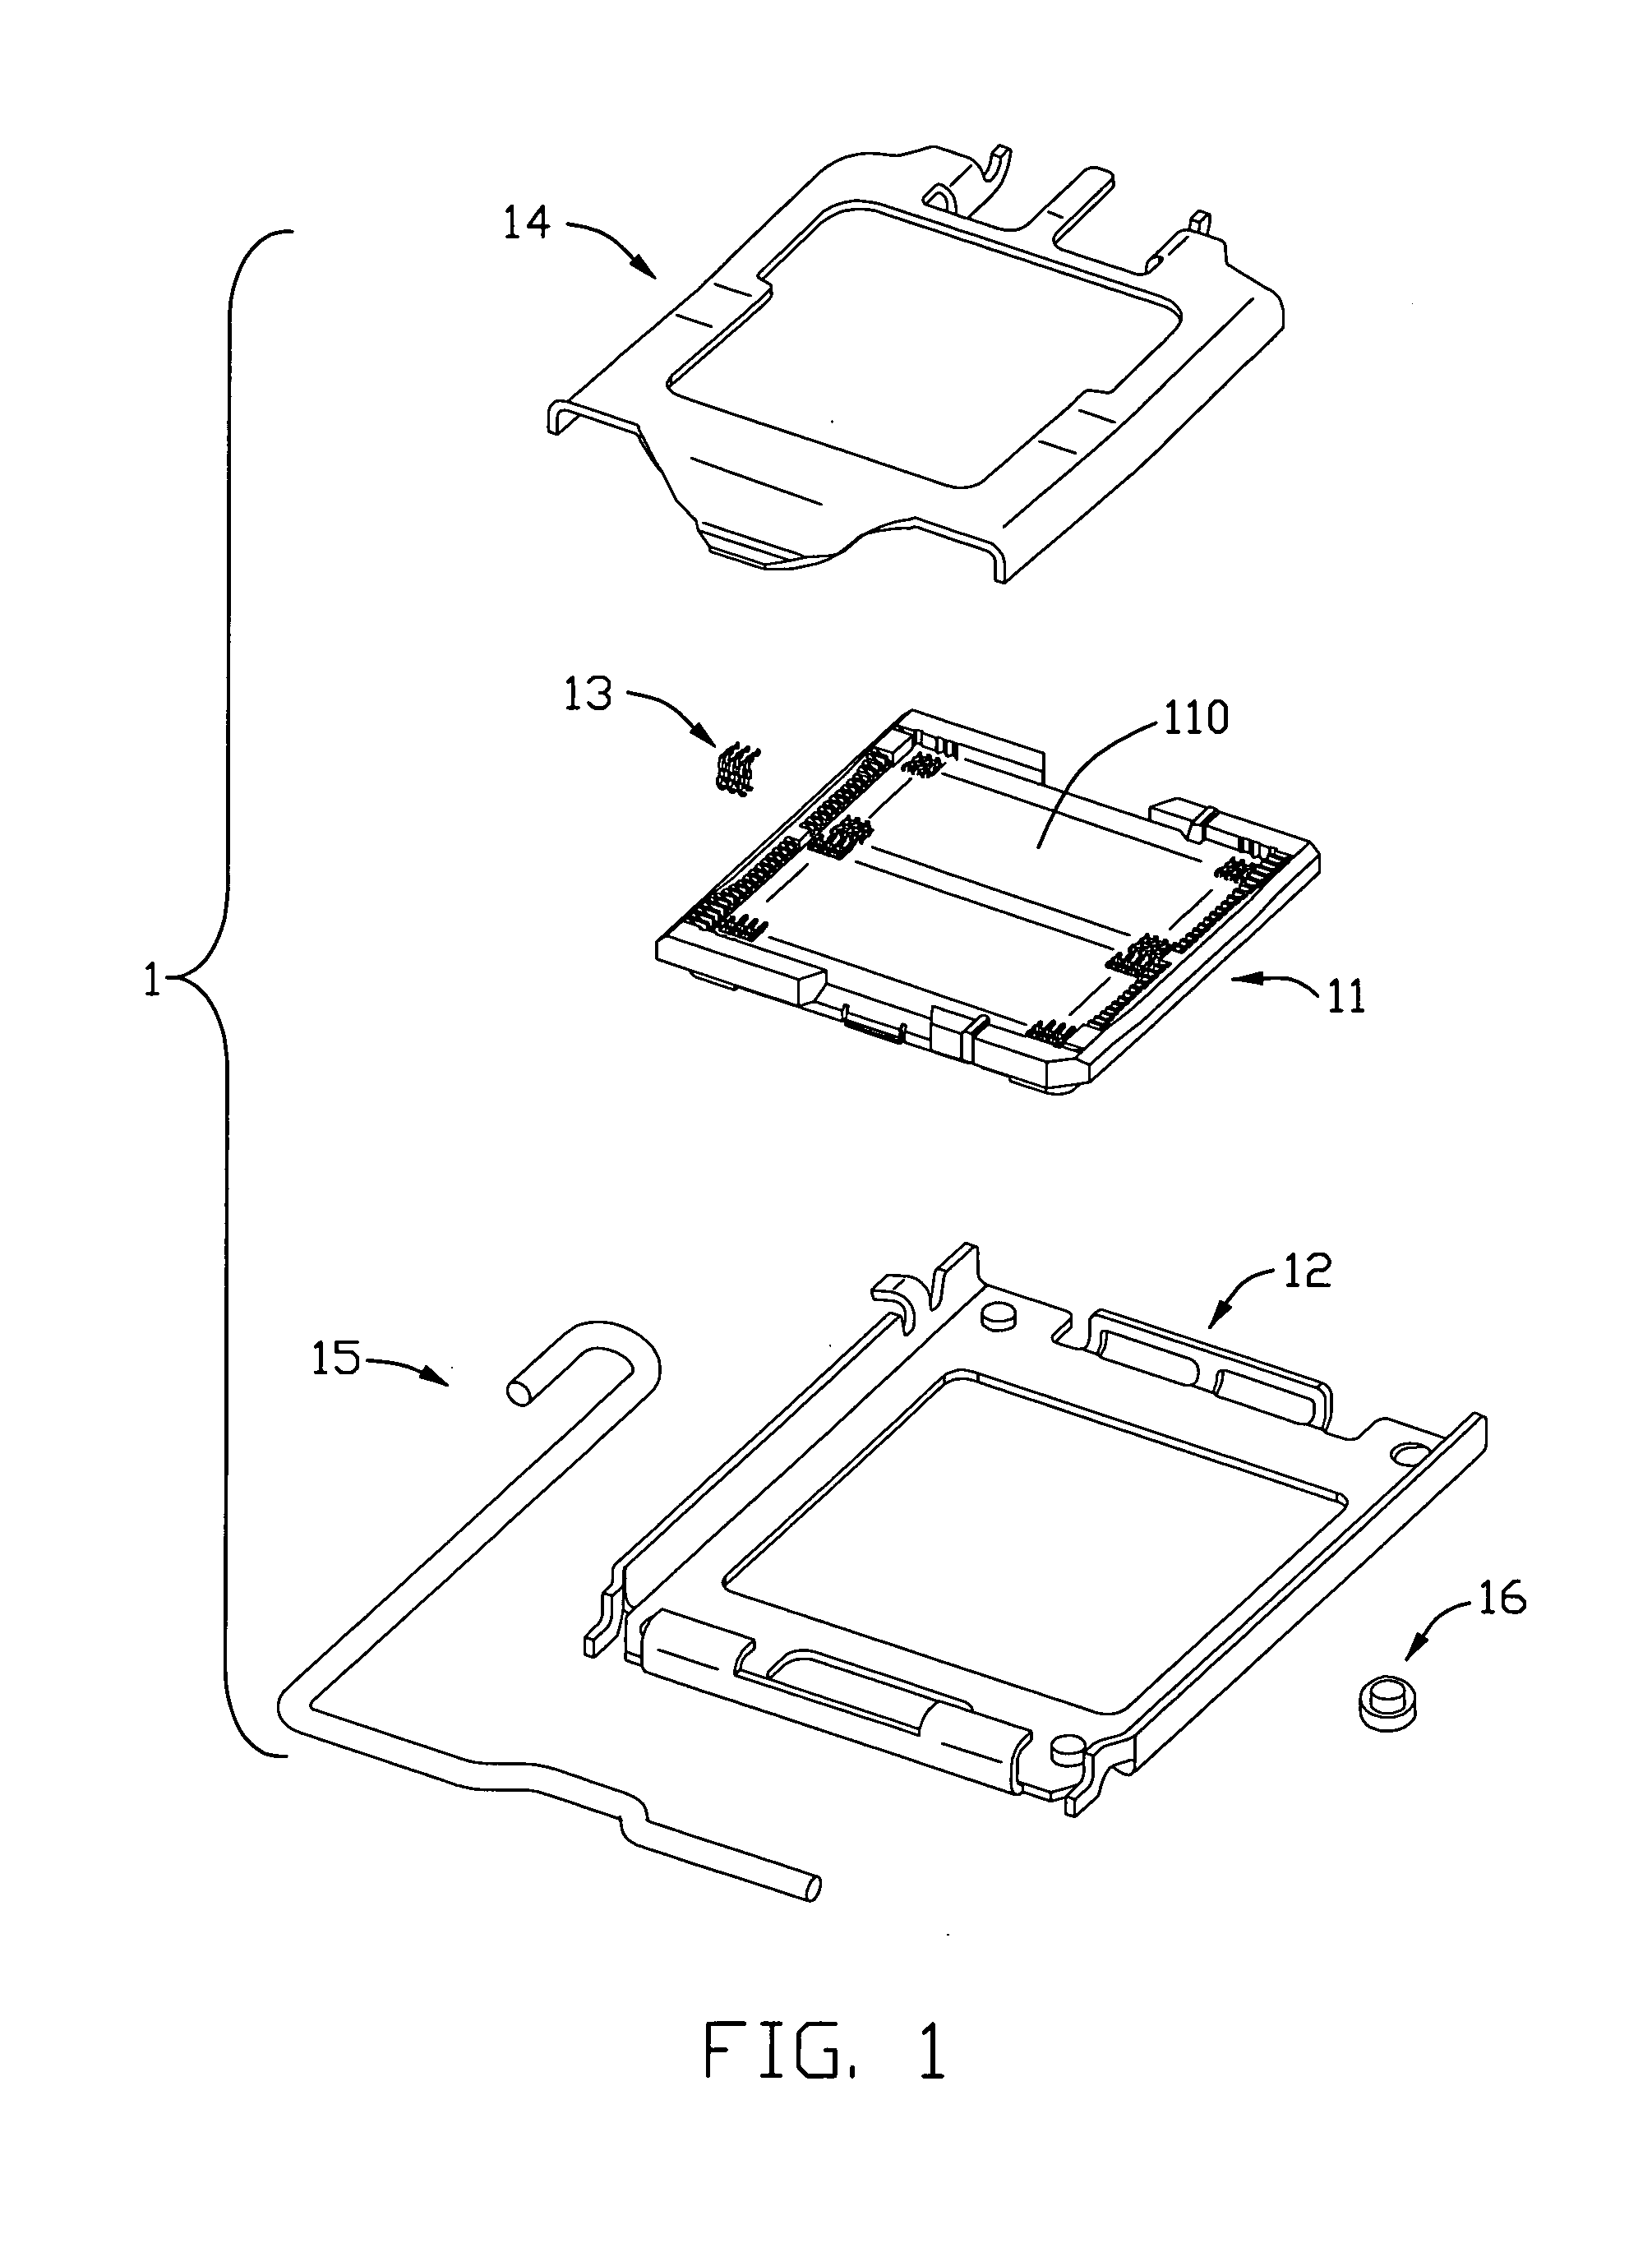 Electrical connector having stiffener fastened by groups of one-step screw post and mating sleeve